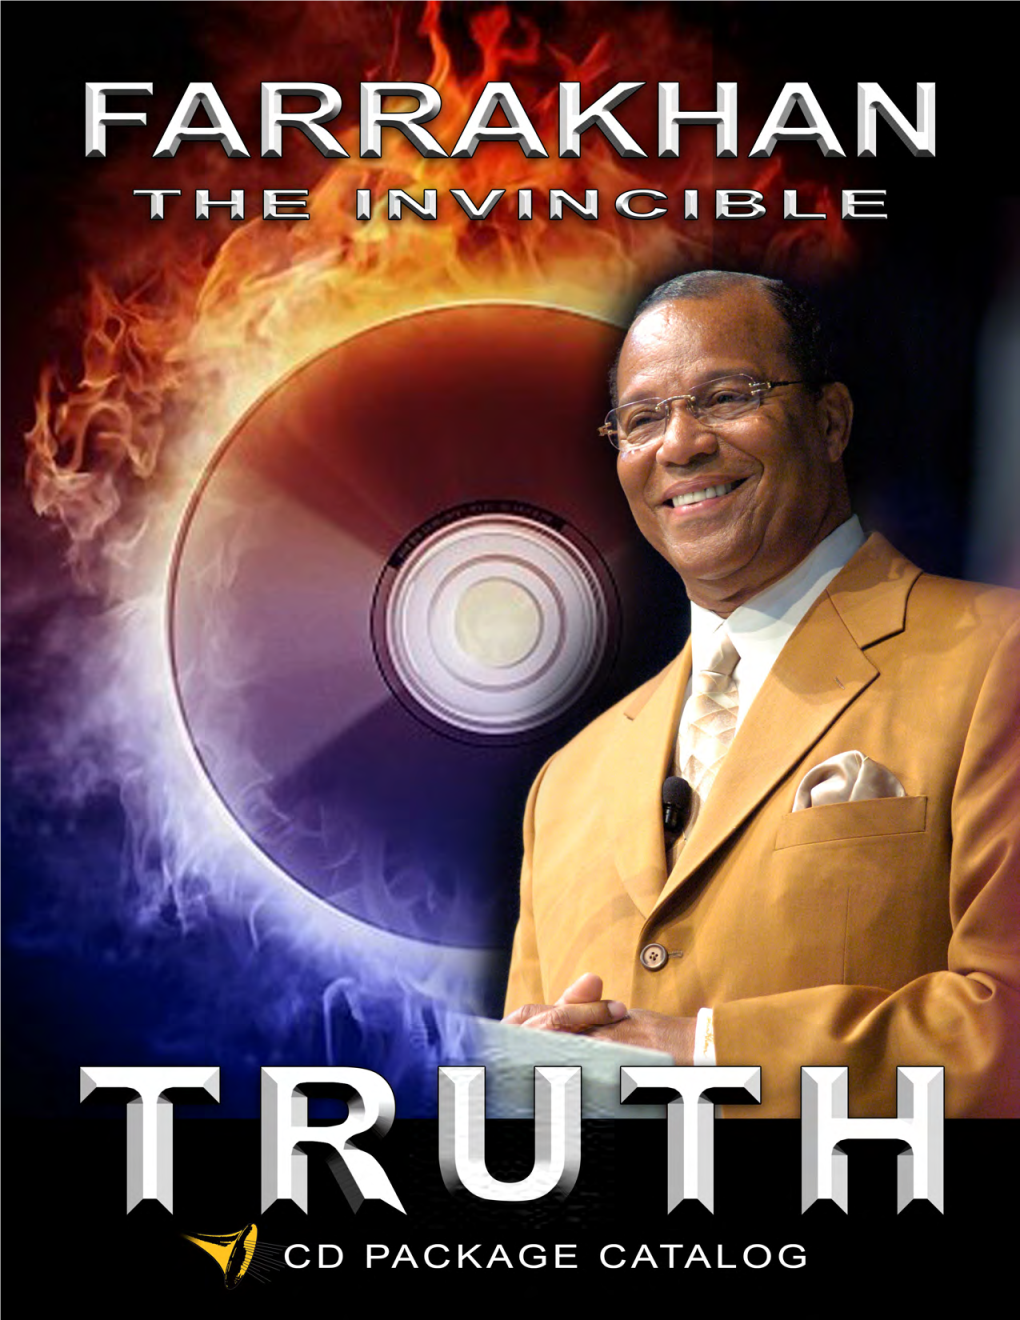 Farrakhan: the Universal Message Page 58 Section 45 This Controversy with the Jews Page 59 Section 46 the U.S